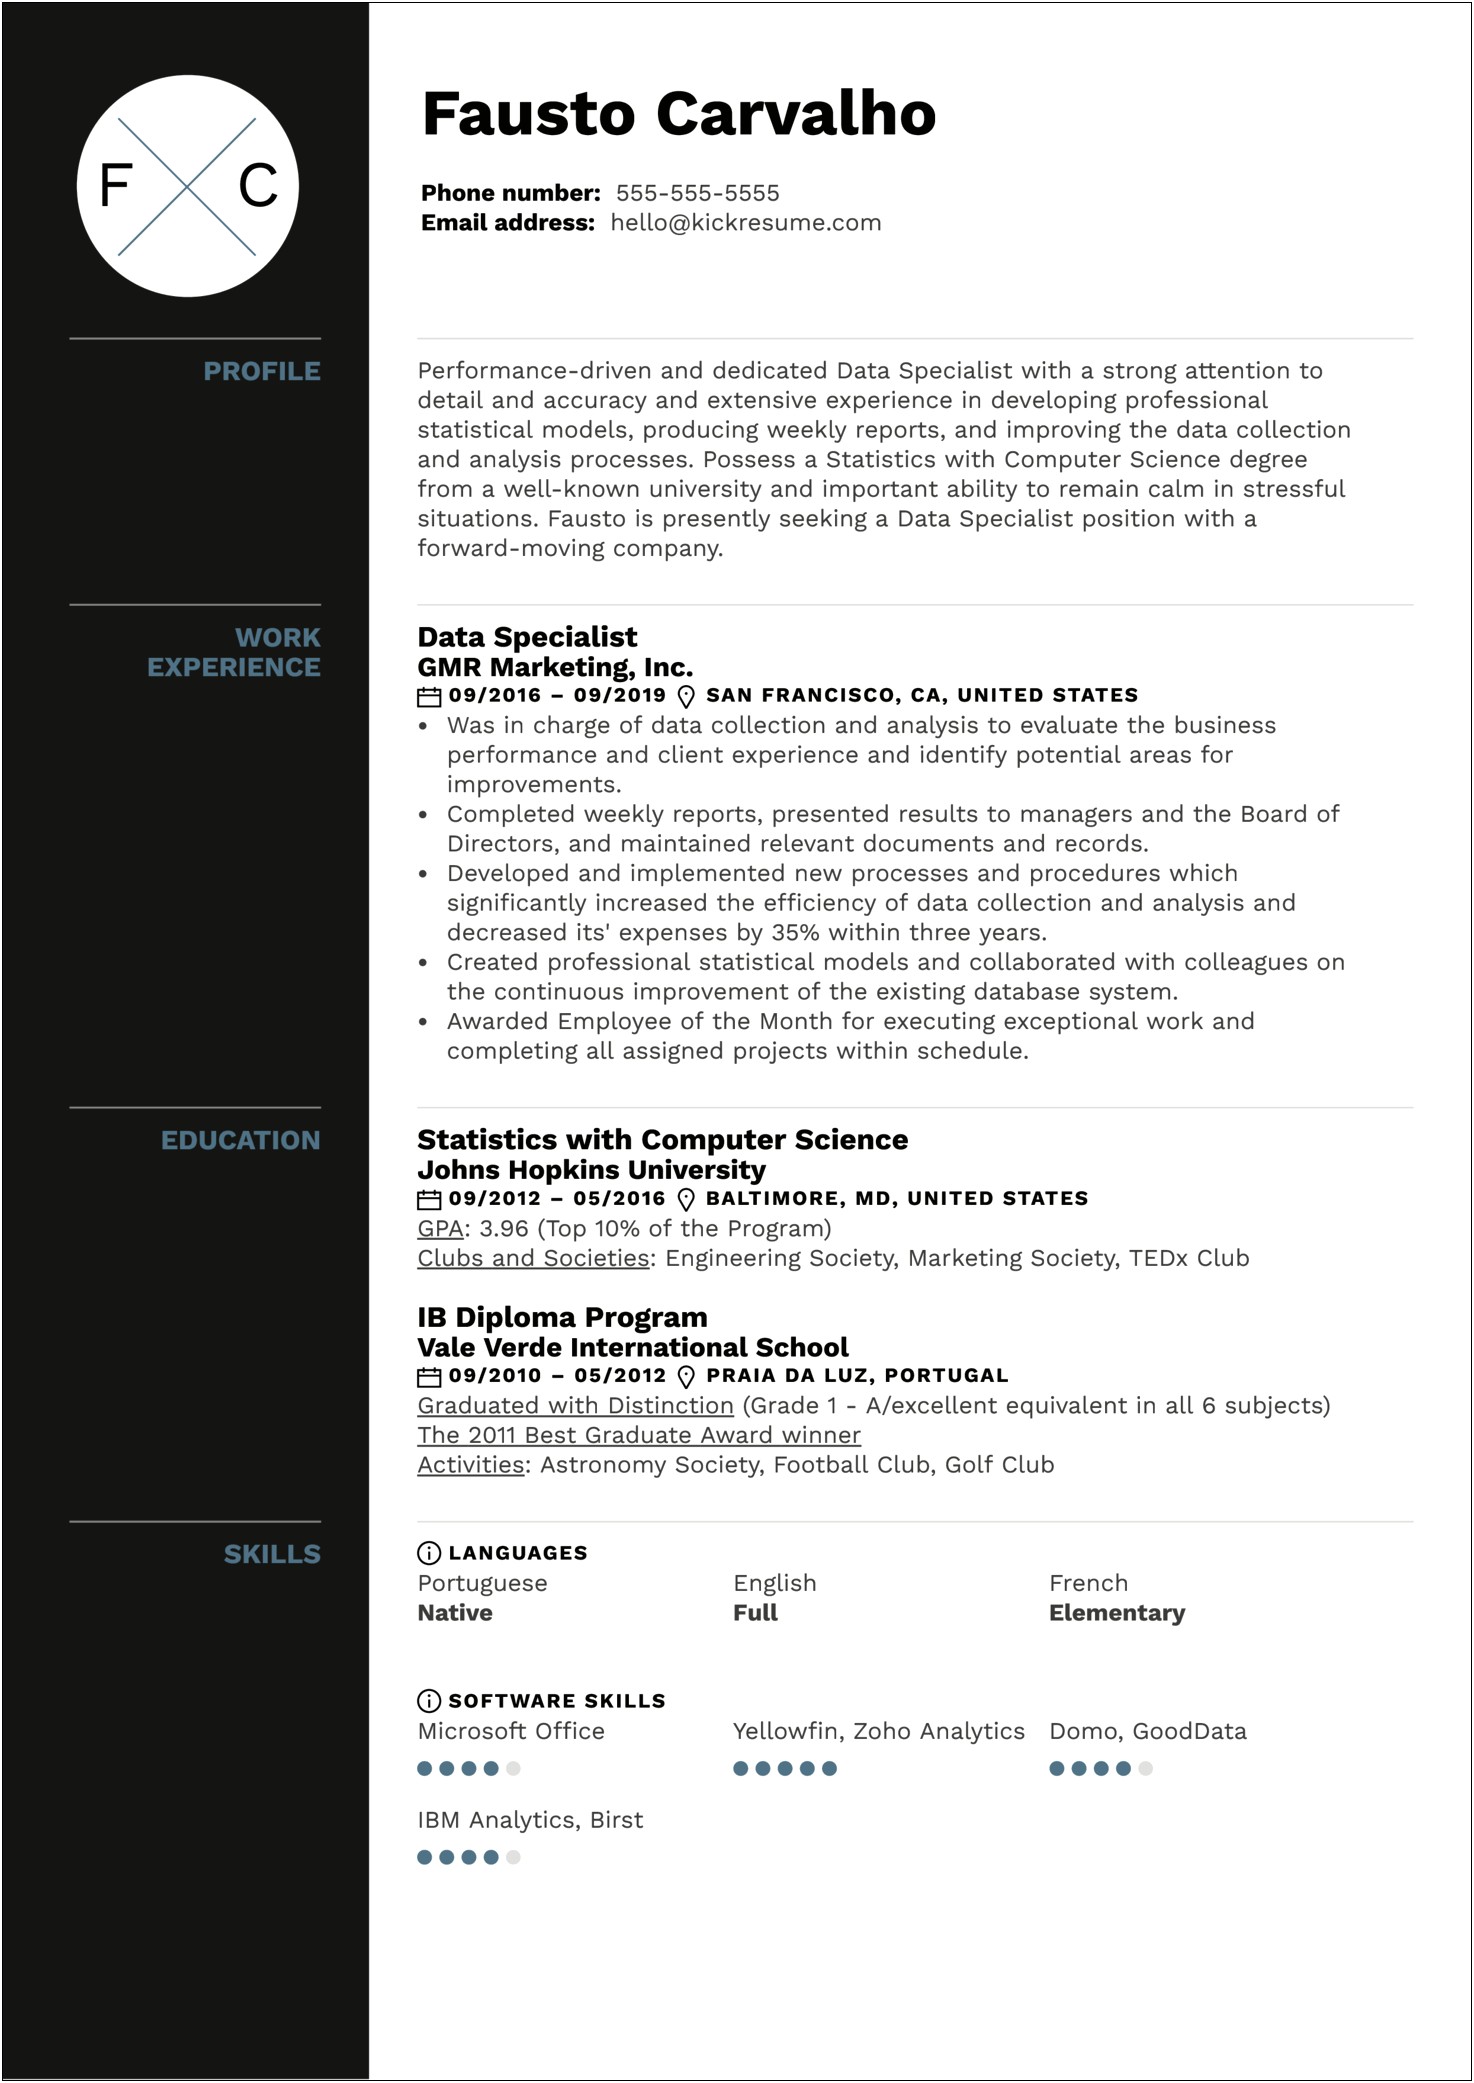 Sample Resume For Medical Collections Representative